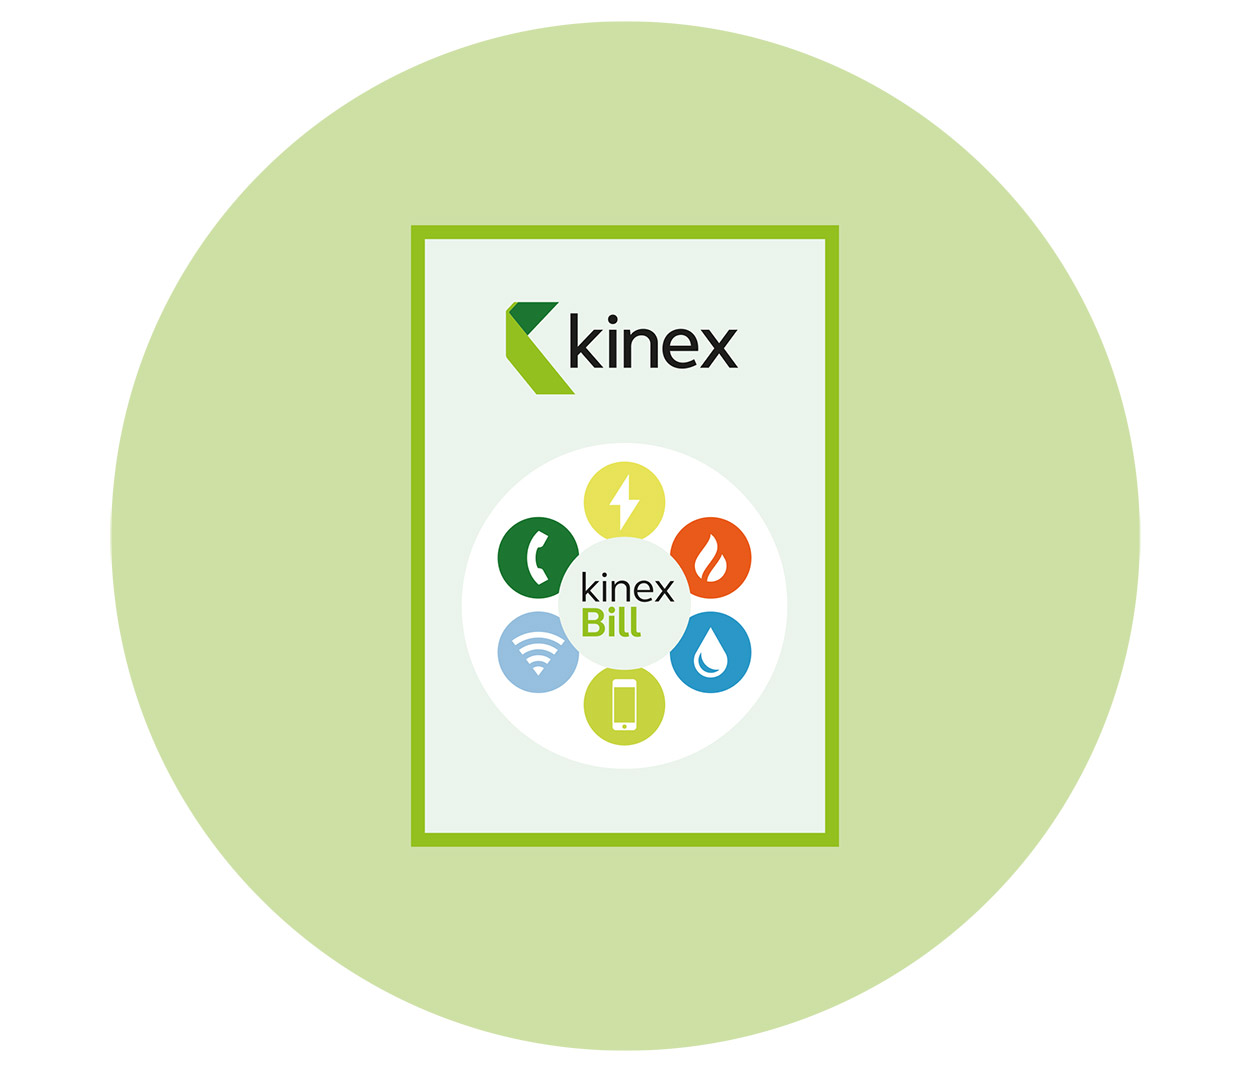 kinex one bill one solution